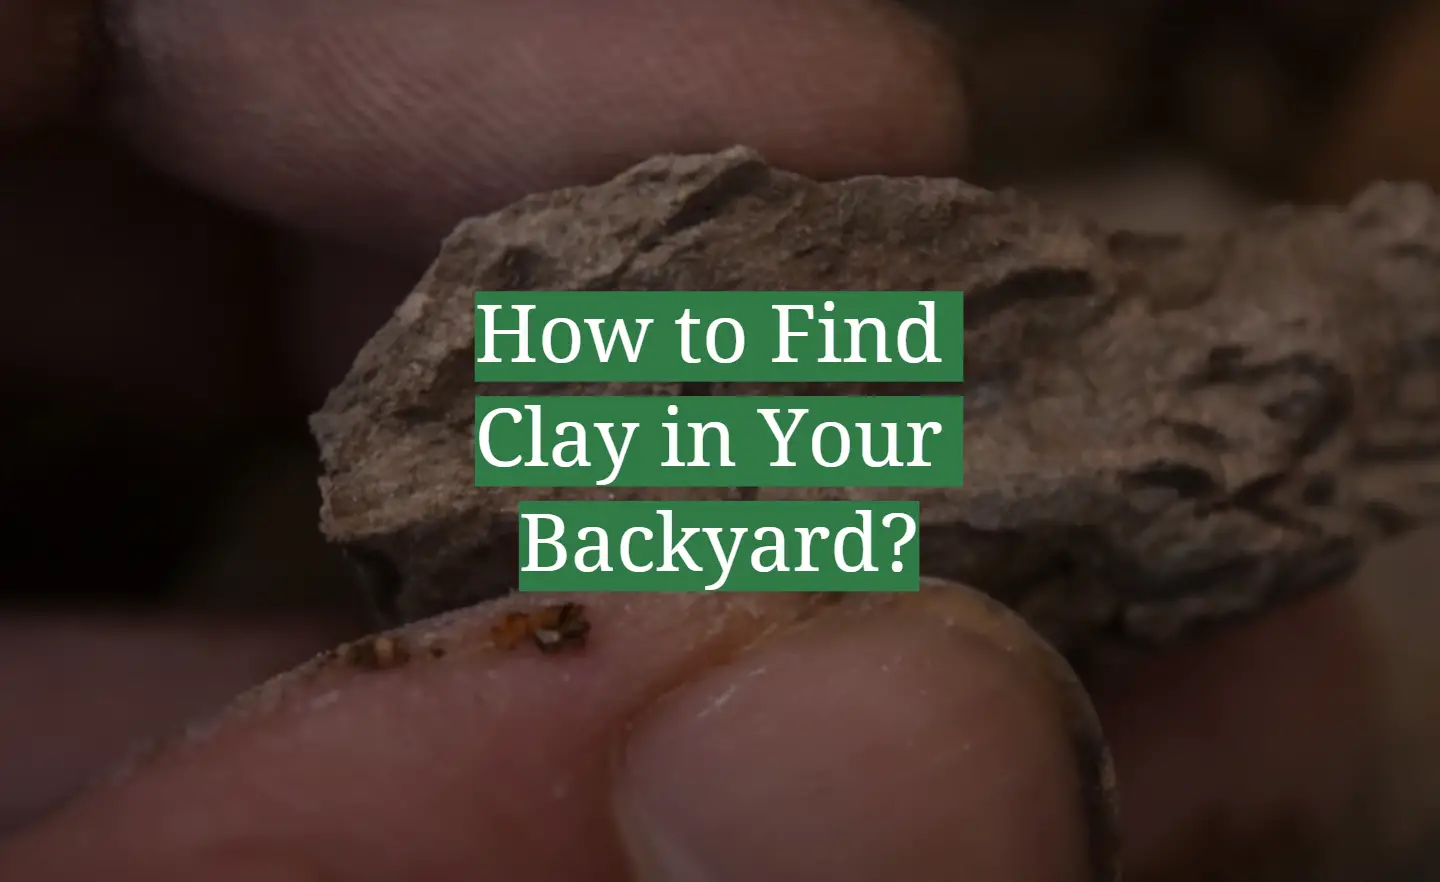 How to Find Clay in Your Backyard?